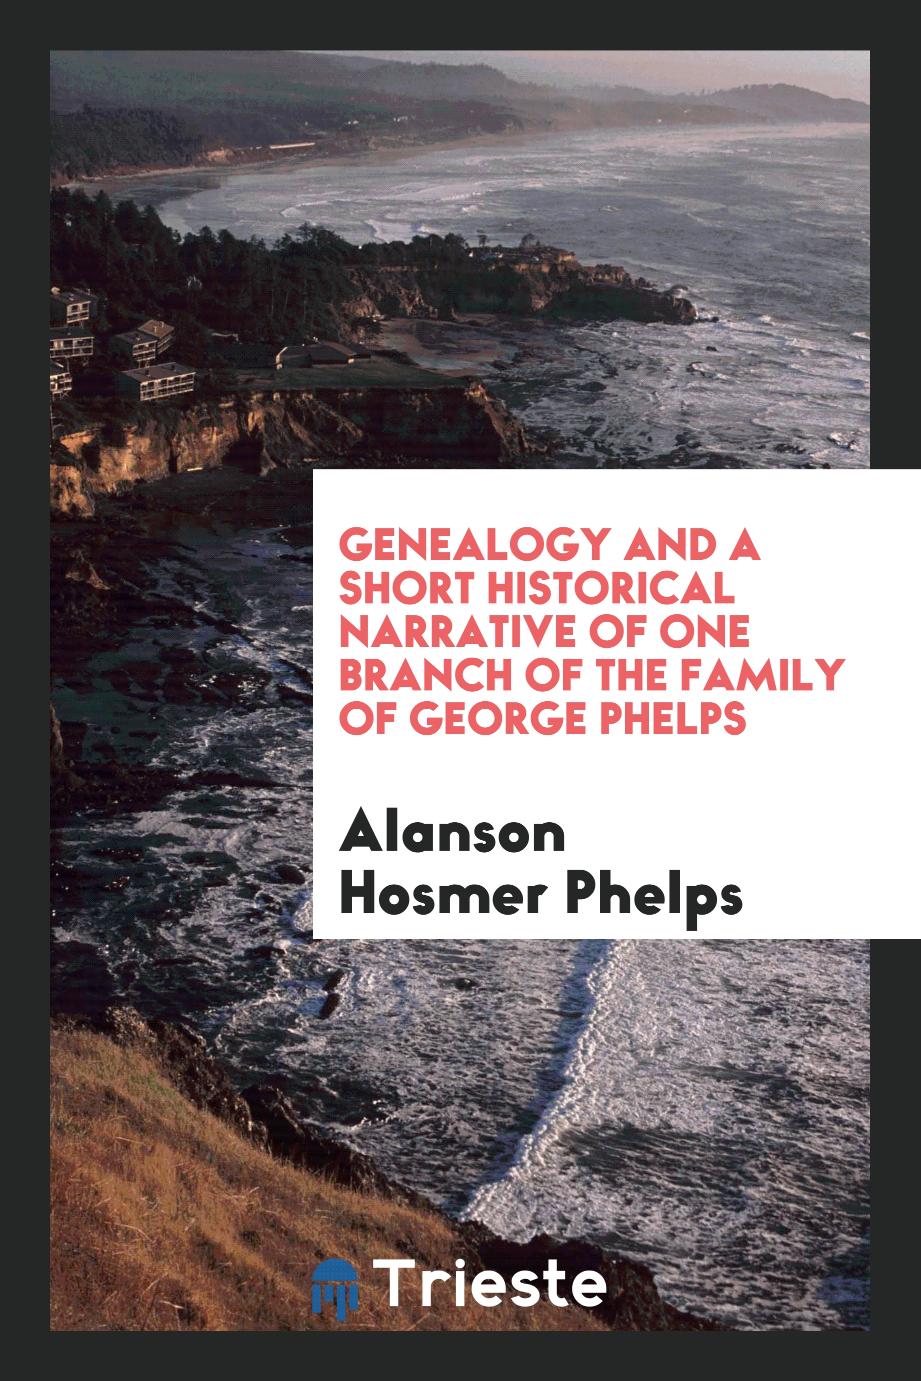 Genealogy and a short historical narrative of one branch of the family of George Phelps